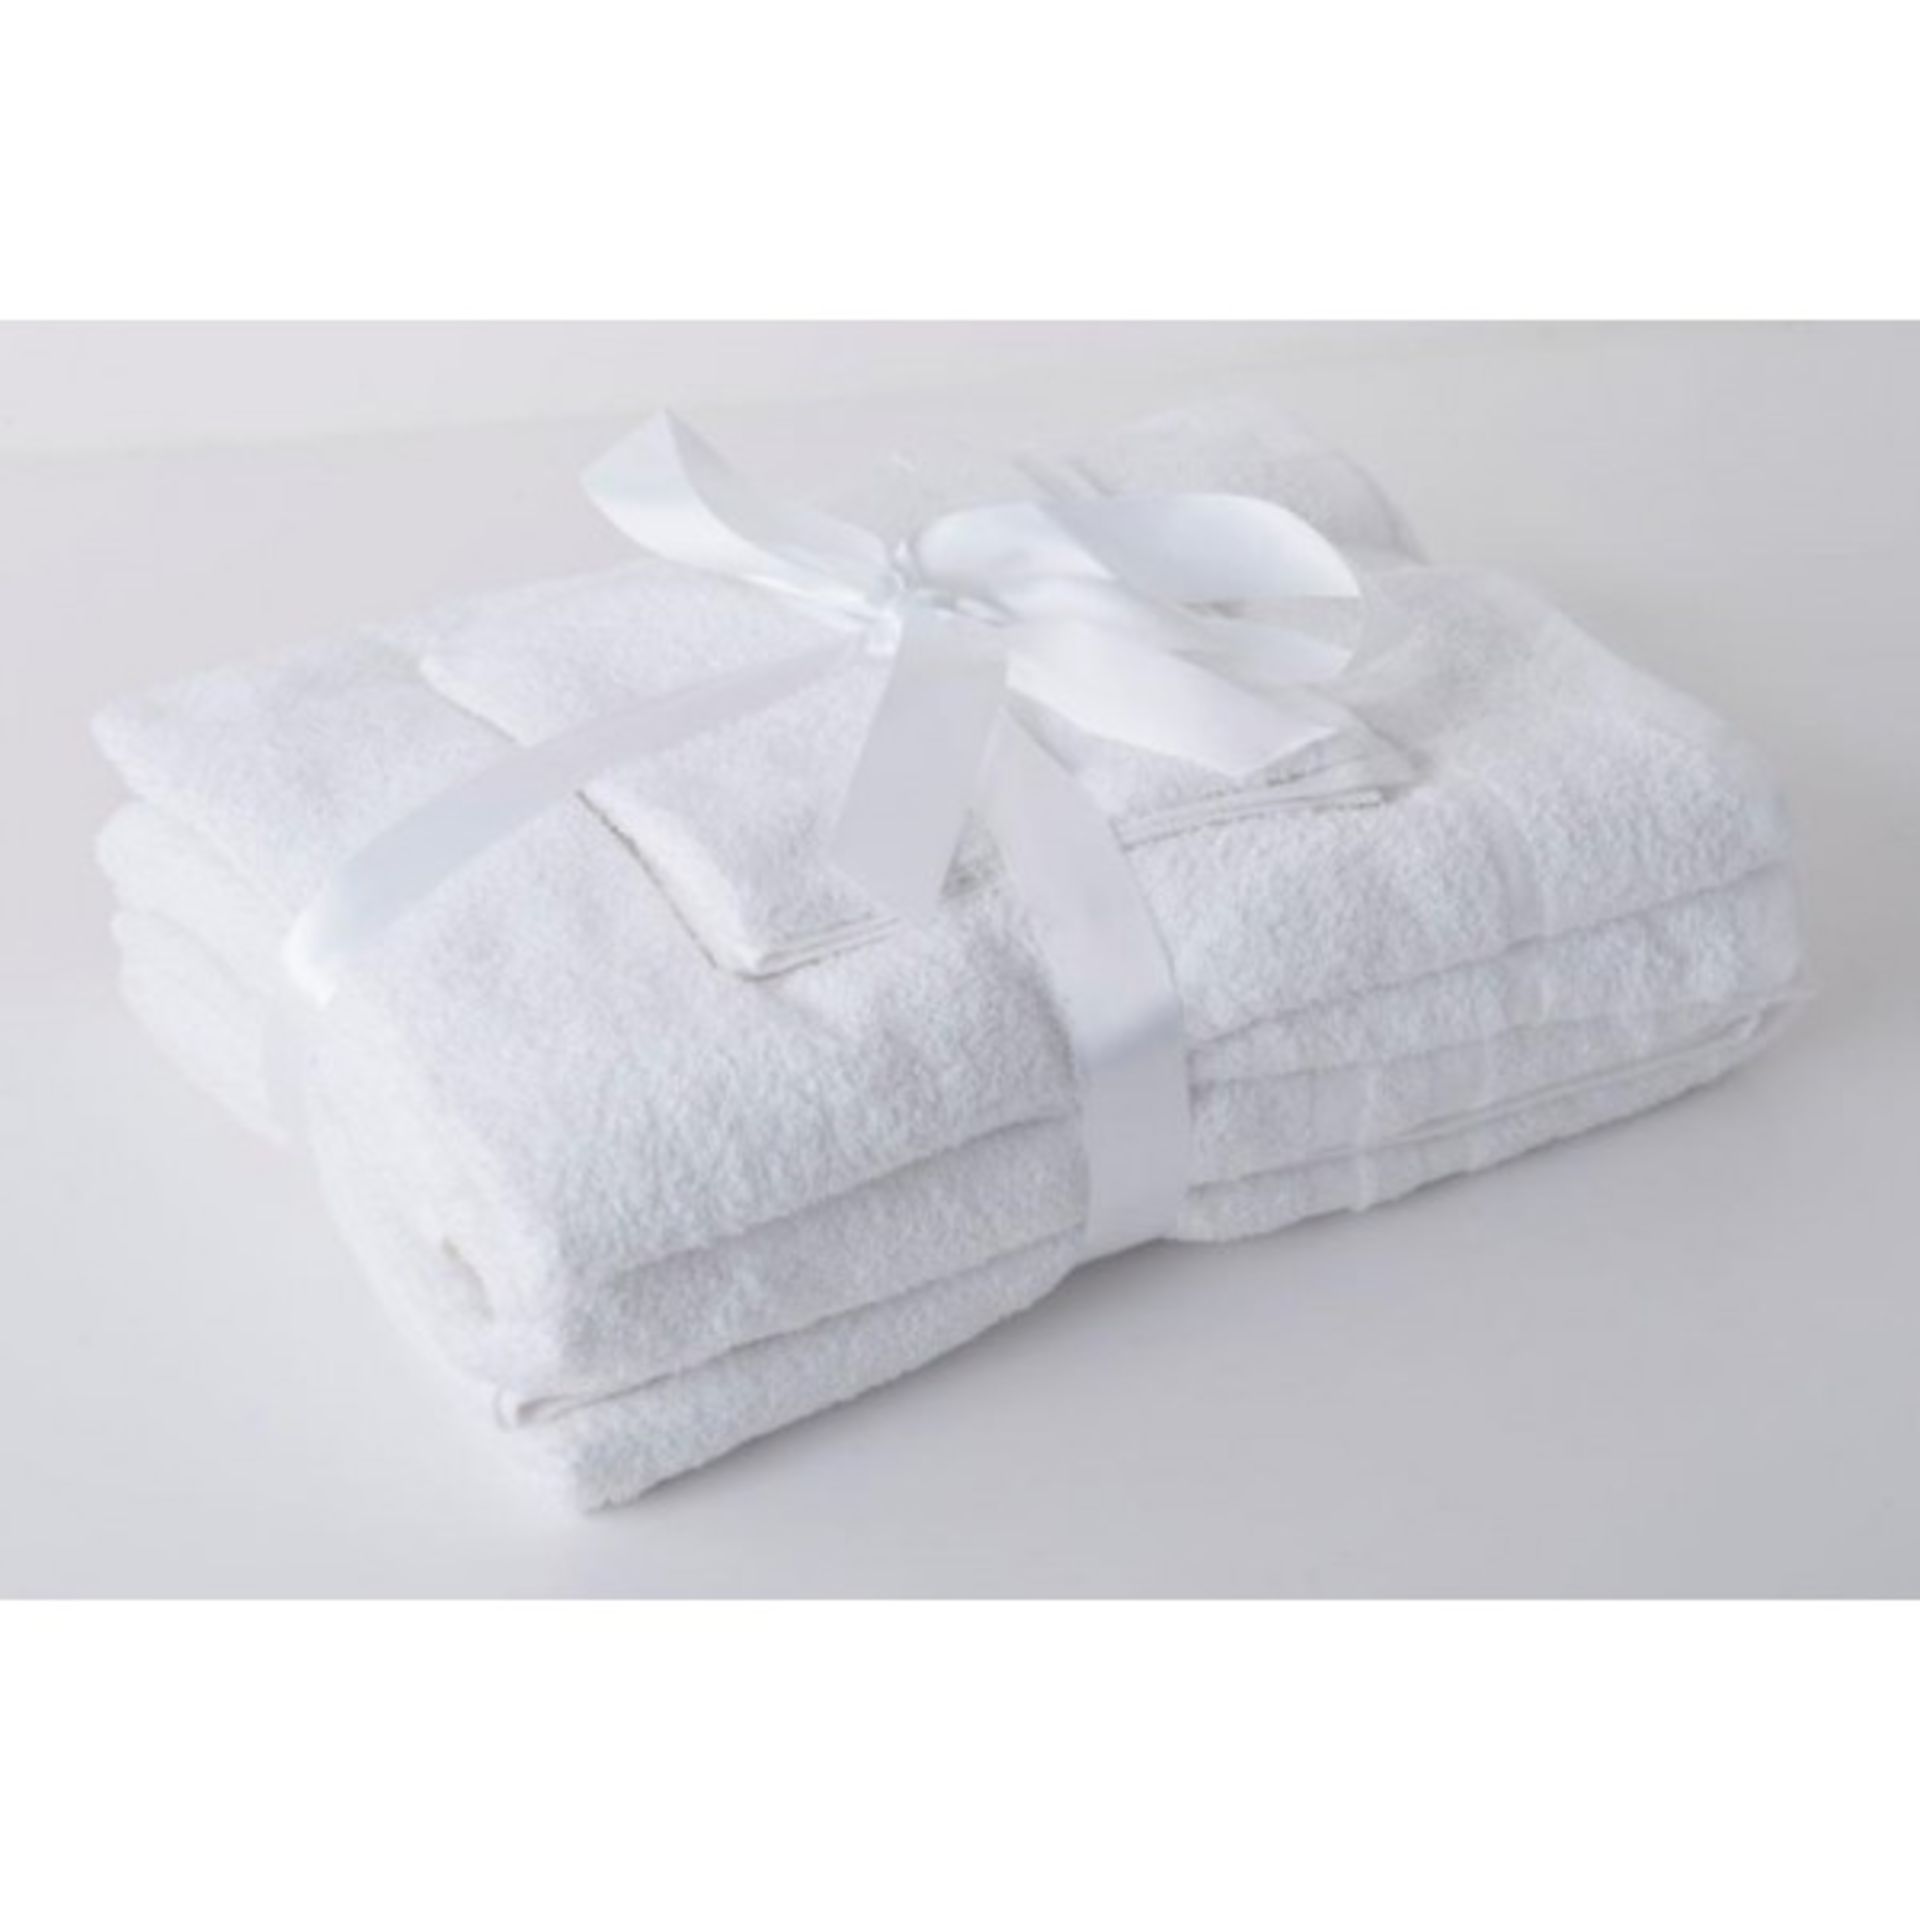 Brand New Six Piece White Towel Bale Set Including Two Bath Towels-Two Hand Towels & Two Face